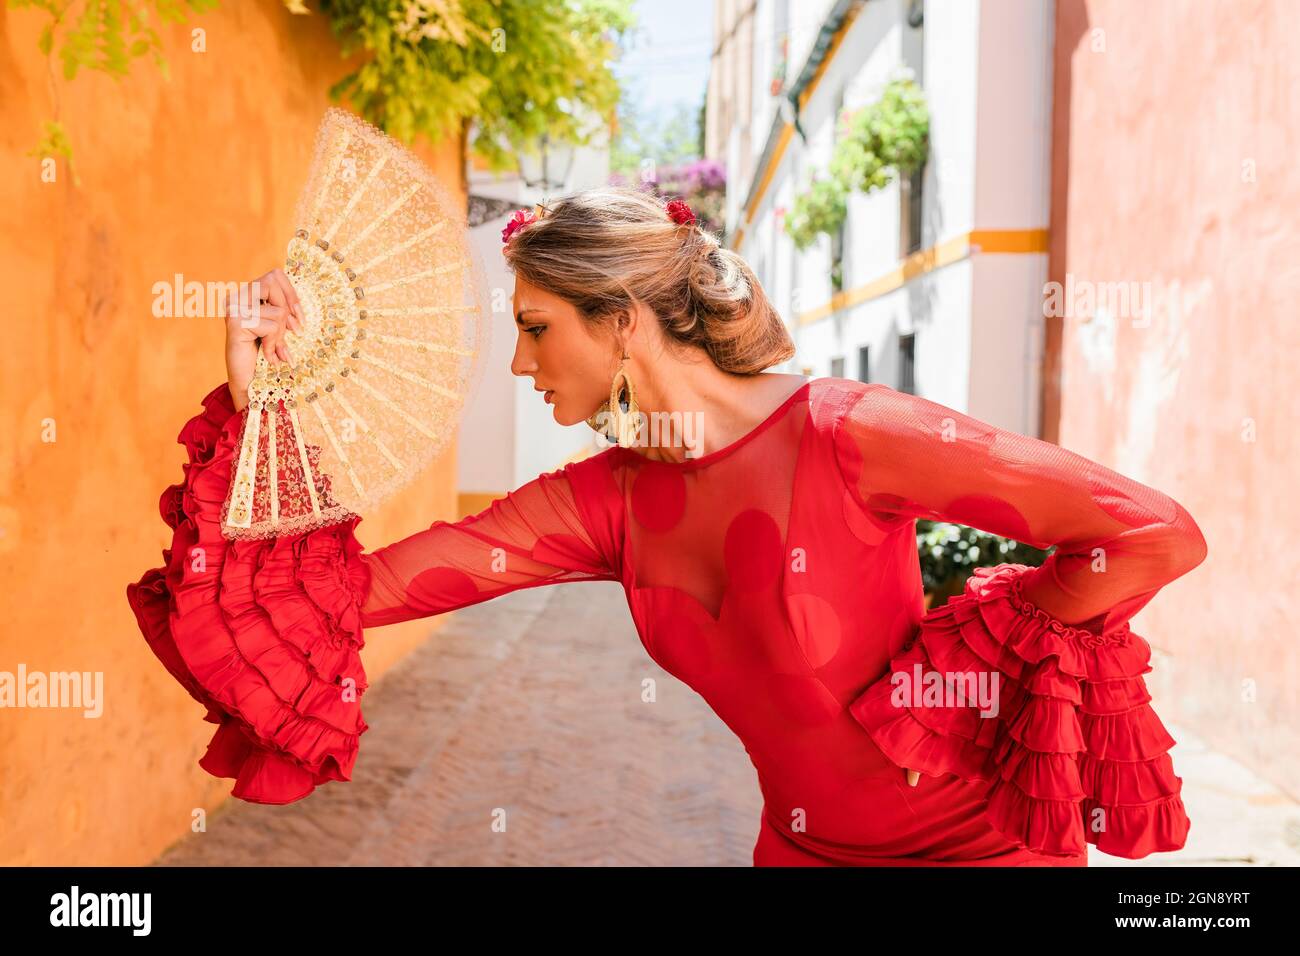 Female flamenco dancer with hand fan dancing at alley Stock Photo